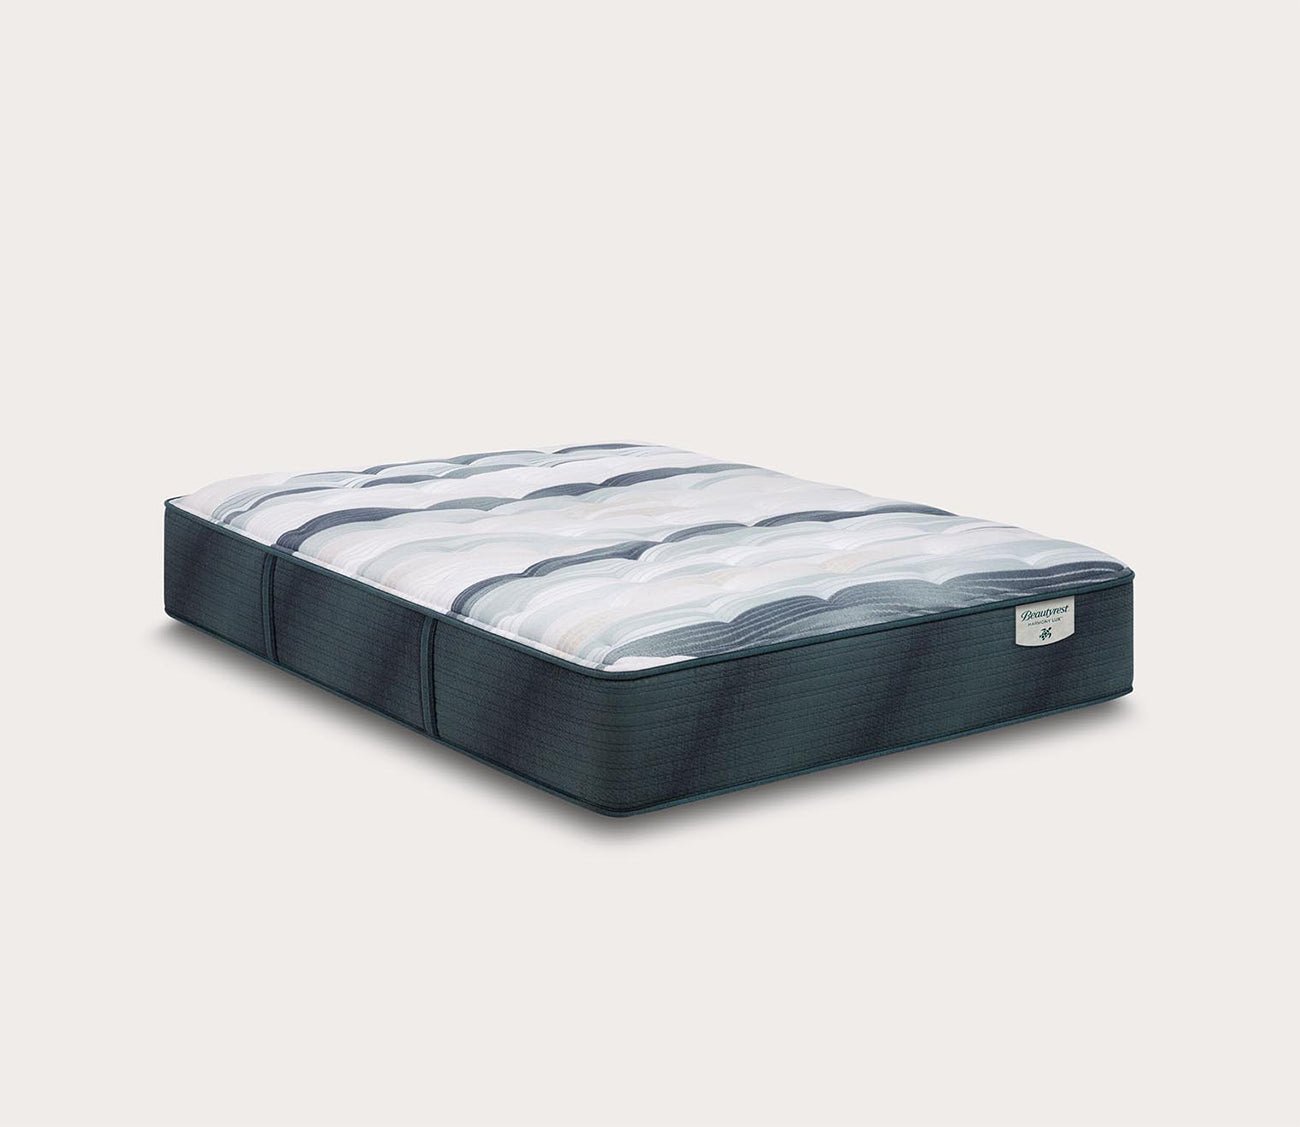 Beautyrest Harmony Lux Coral Medium Mattress by Simmons